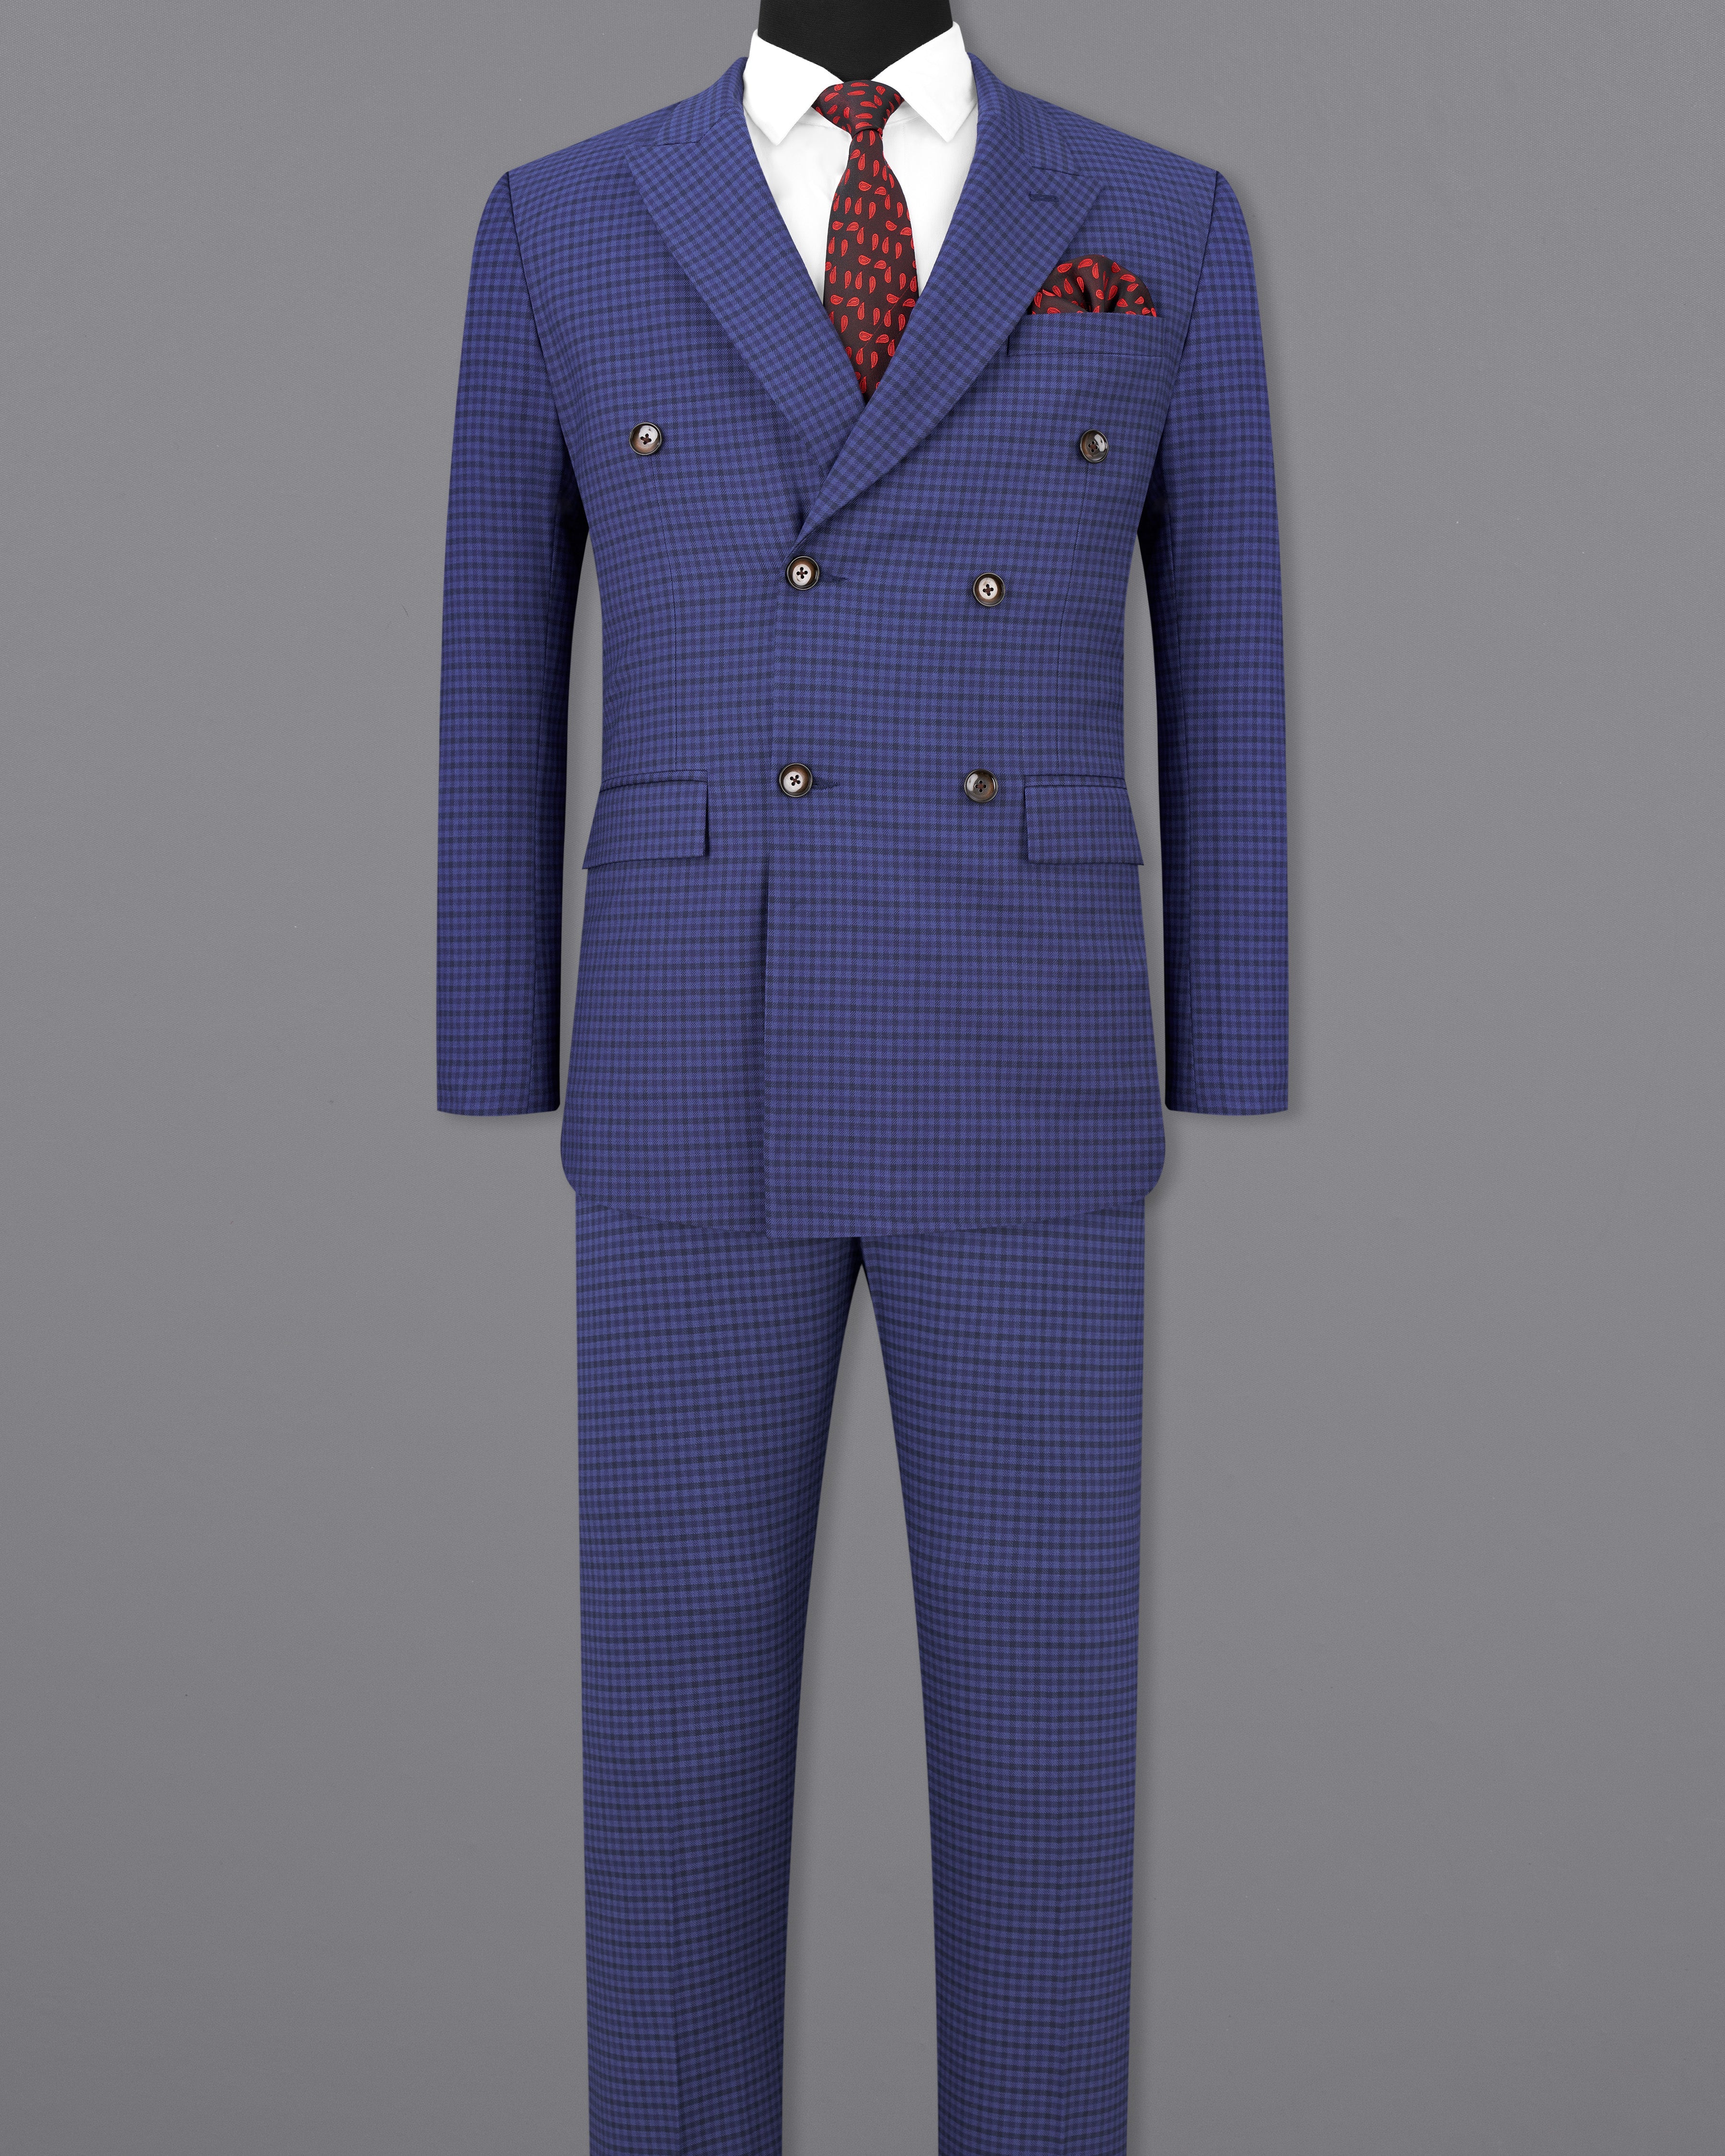 Victoria Blue Gingham Checkered Double Breasted Suit ST2495-DB-36, ST2495-DB-38, ST2495-DB-40, ST2495-DB-42, ST2495-DB-44, ST2495-DB-46, ST2495-DB-48, ST2495-DB-50, ST2495-DB-52, ST2495-DB-54, ST2495-DB-56, ST2495-DB-58, ST2495-DB-63